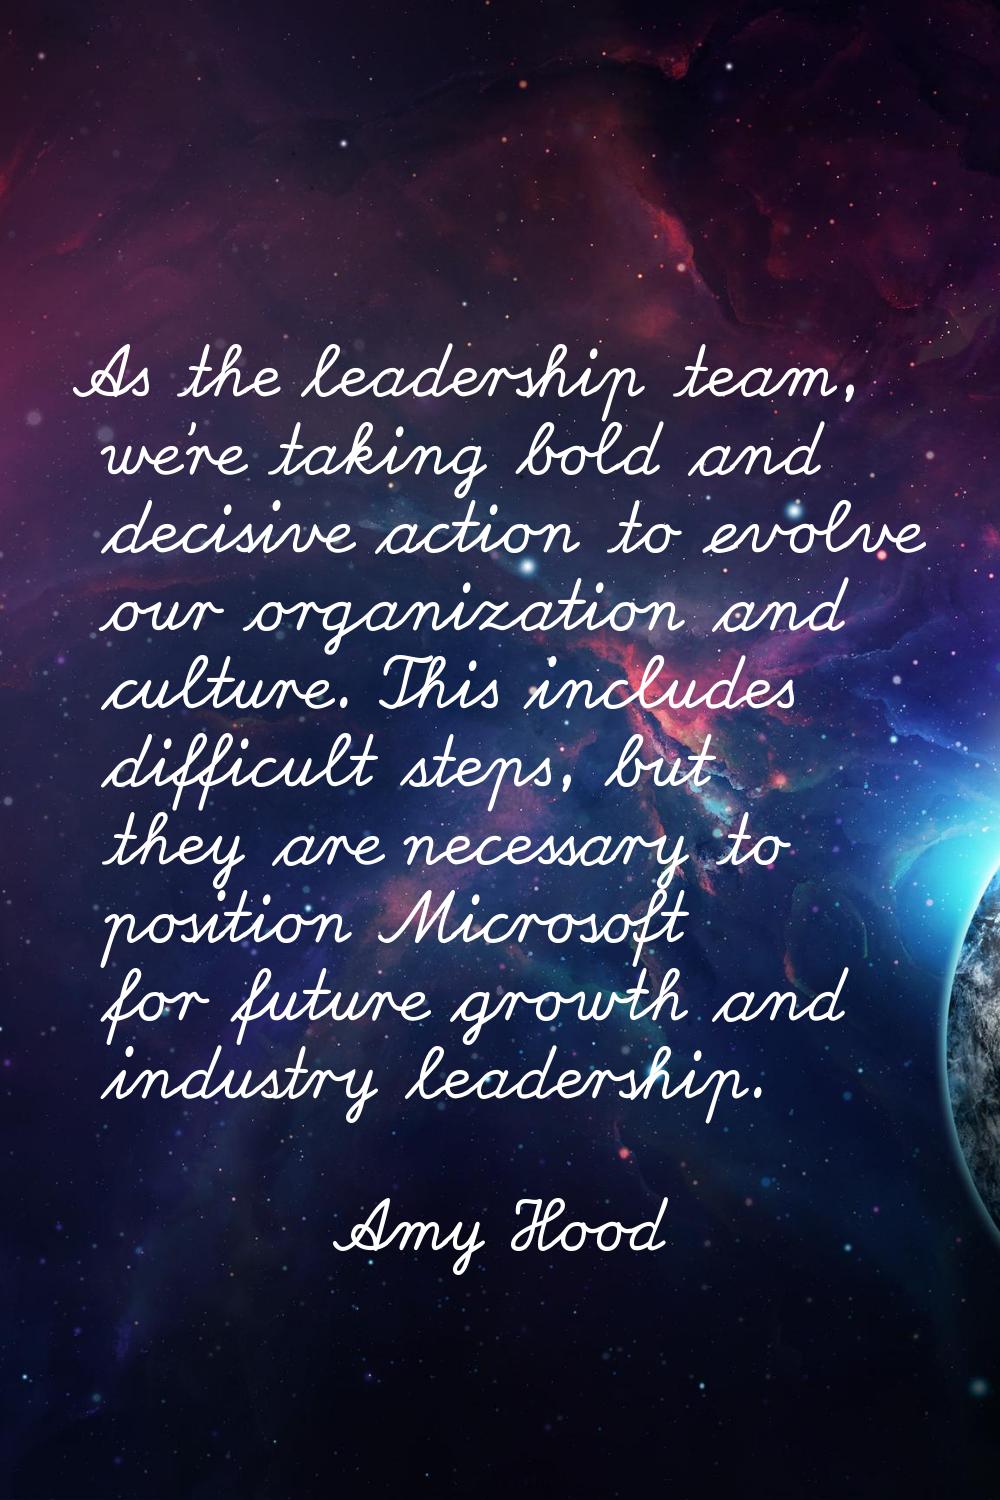 As the leadership team, we're taking bold and decisive action to evolve our organization and cultur